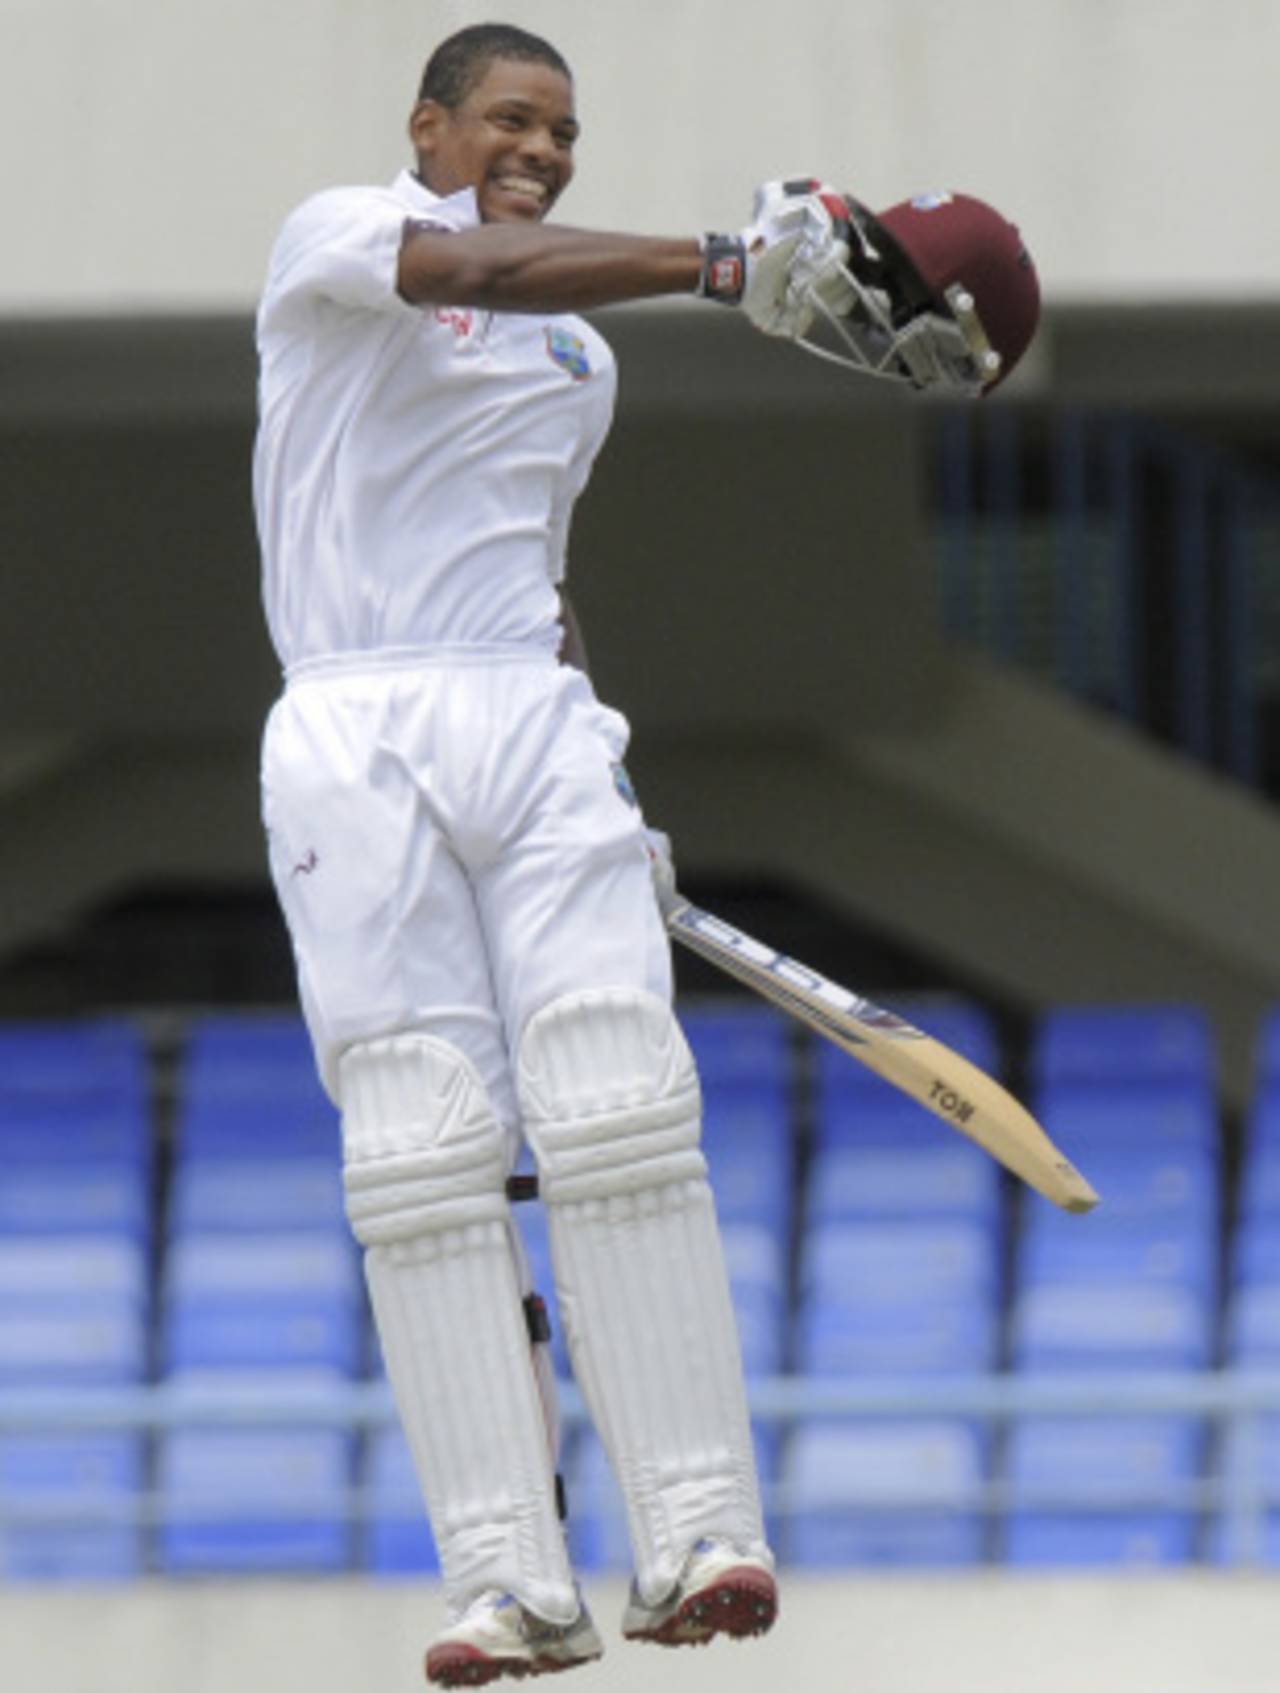 Kieran Powell celebrates after reaching his maiden Test century, West Indies v New Zealand, 1st Test, Antigua, 3rd day, July 27, 2012